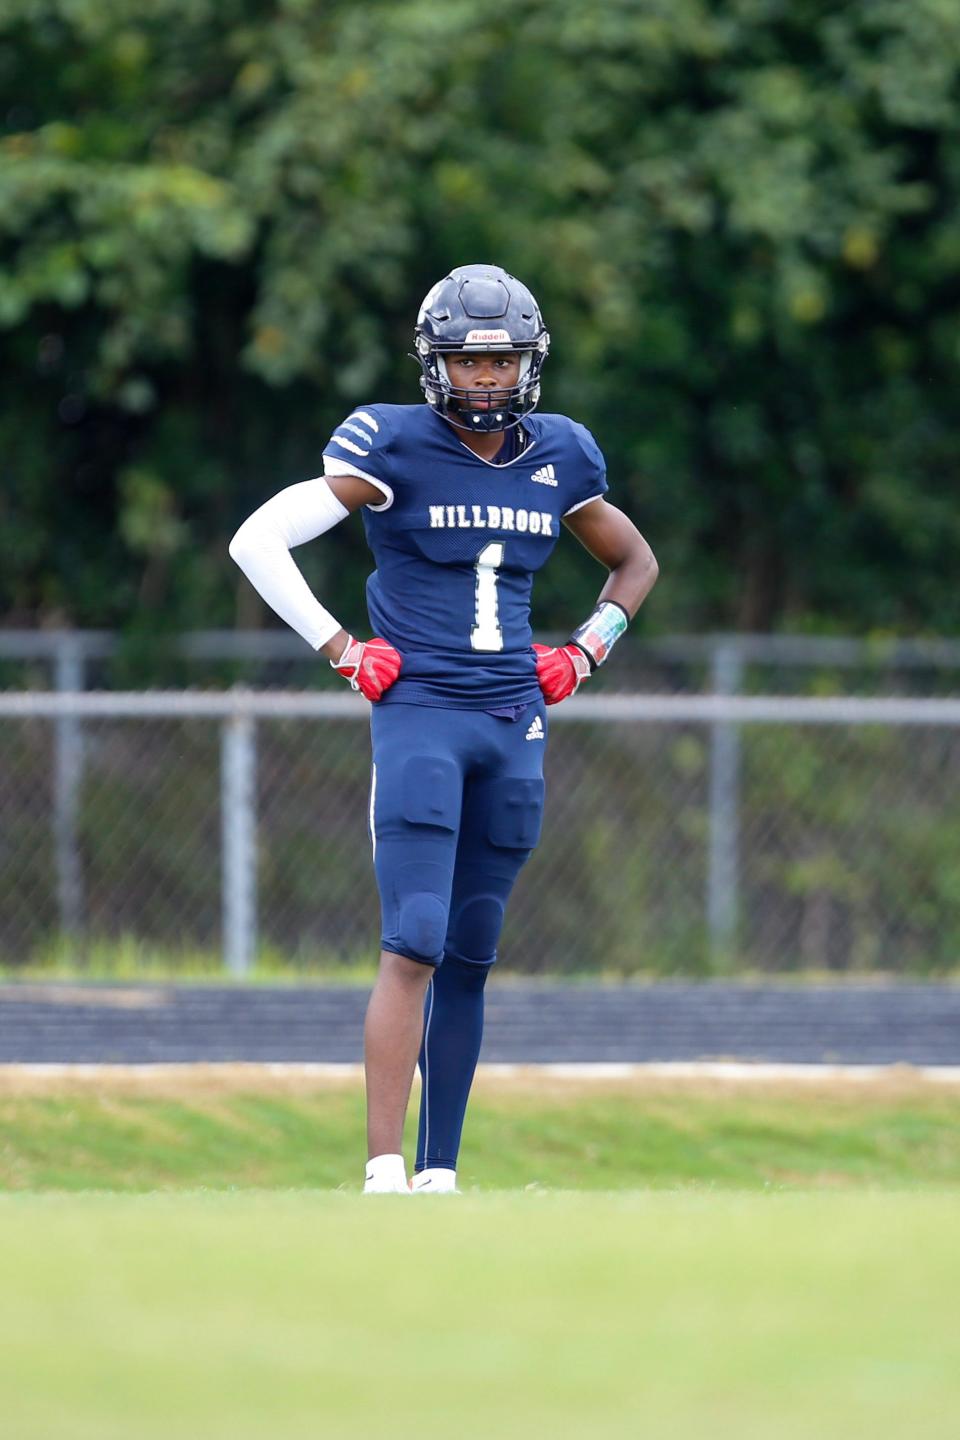 Millbrook football wide receiver and three-star 2022 recruit Wesley Grimes (1) competes against Enloe in an Aug. 27, 2021, game in Raleigh. The Wildcats won, 42-0.